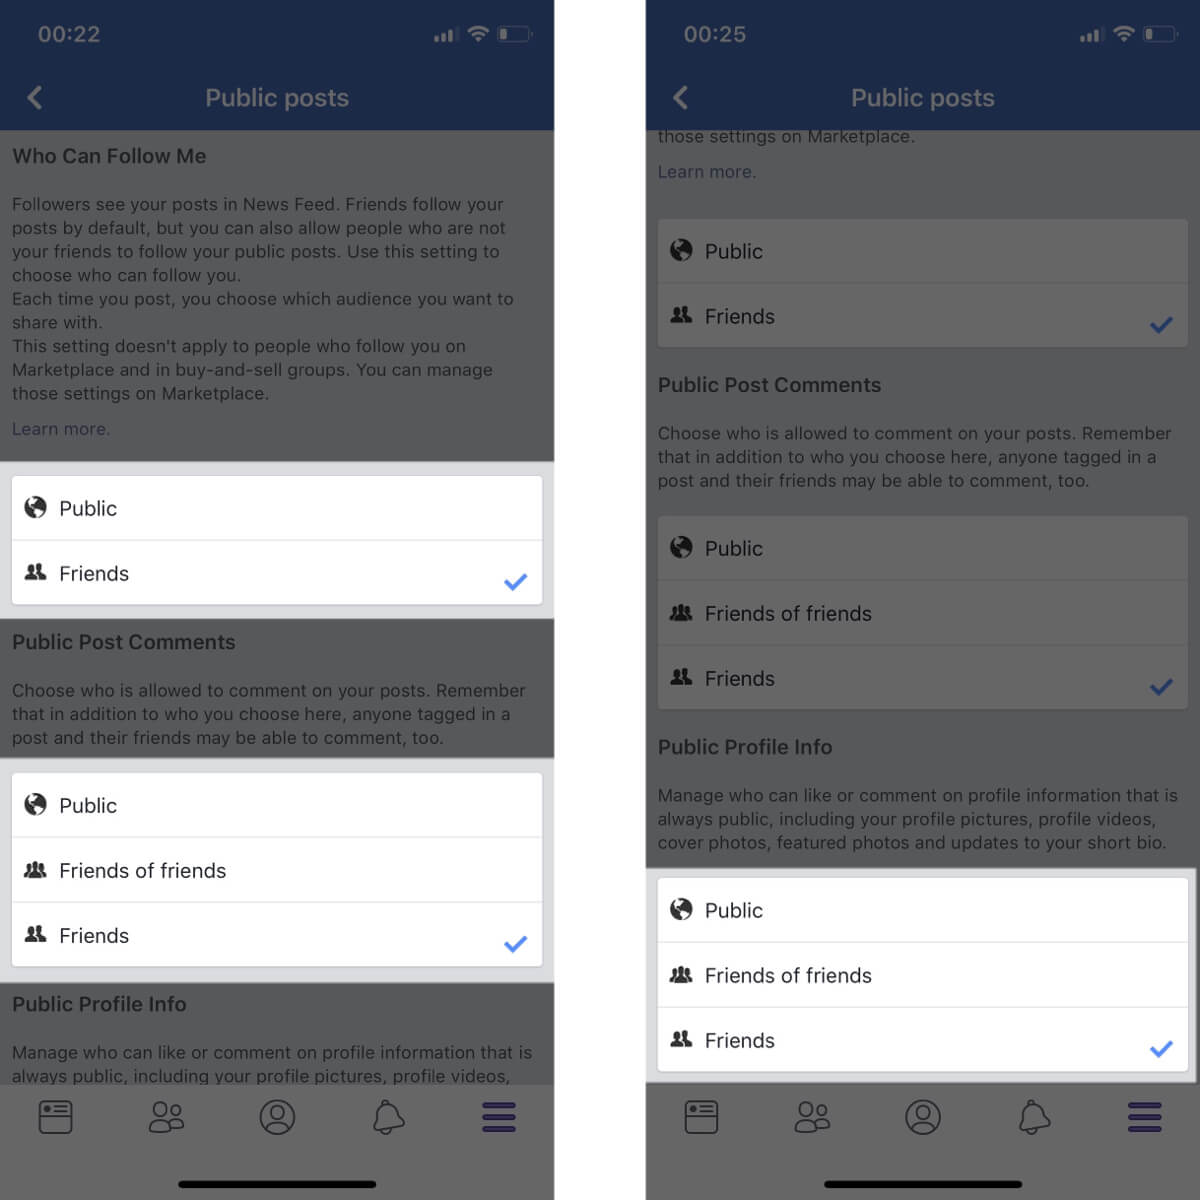 Screenshots showing the specific public post settings you should change to minimize public interactions and the associated data collection on Facebook.